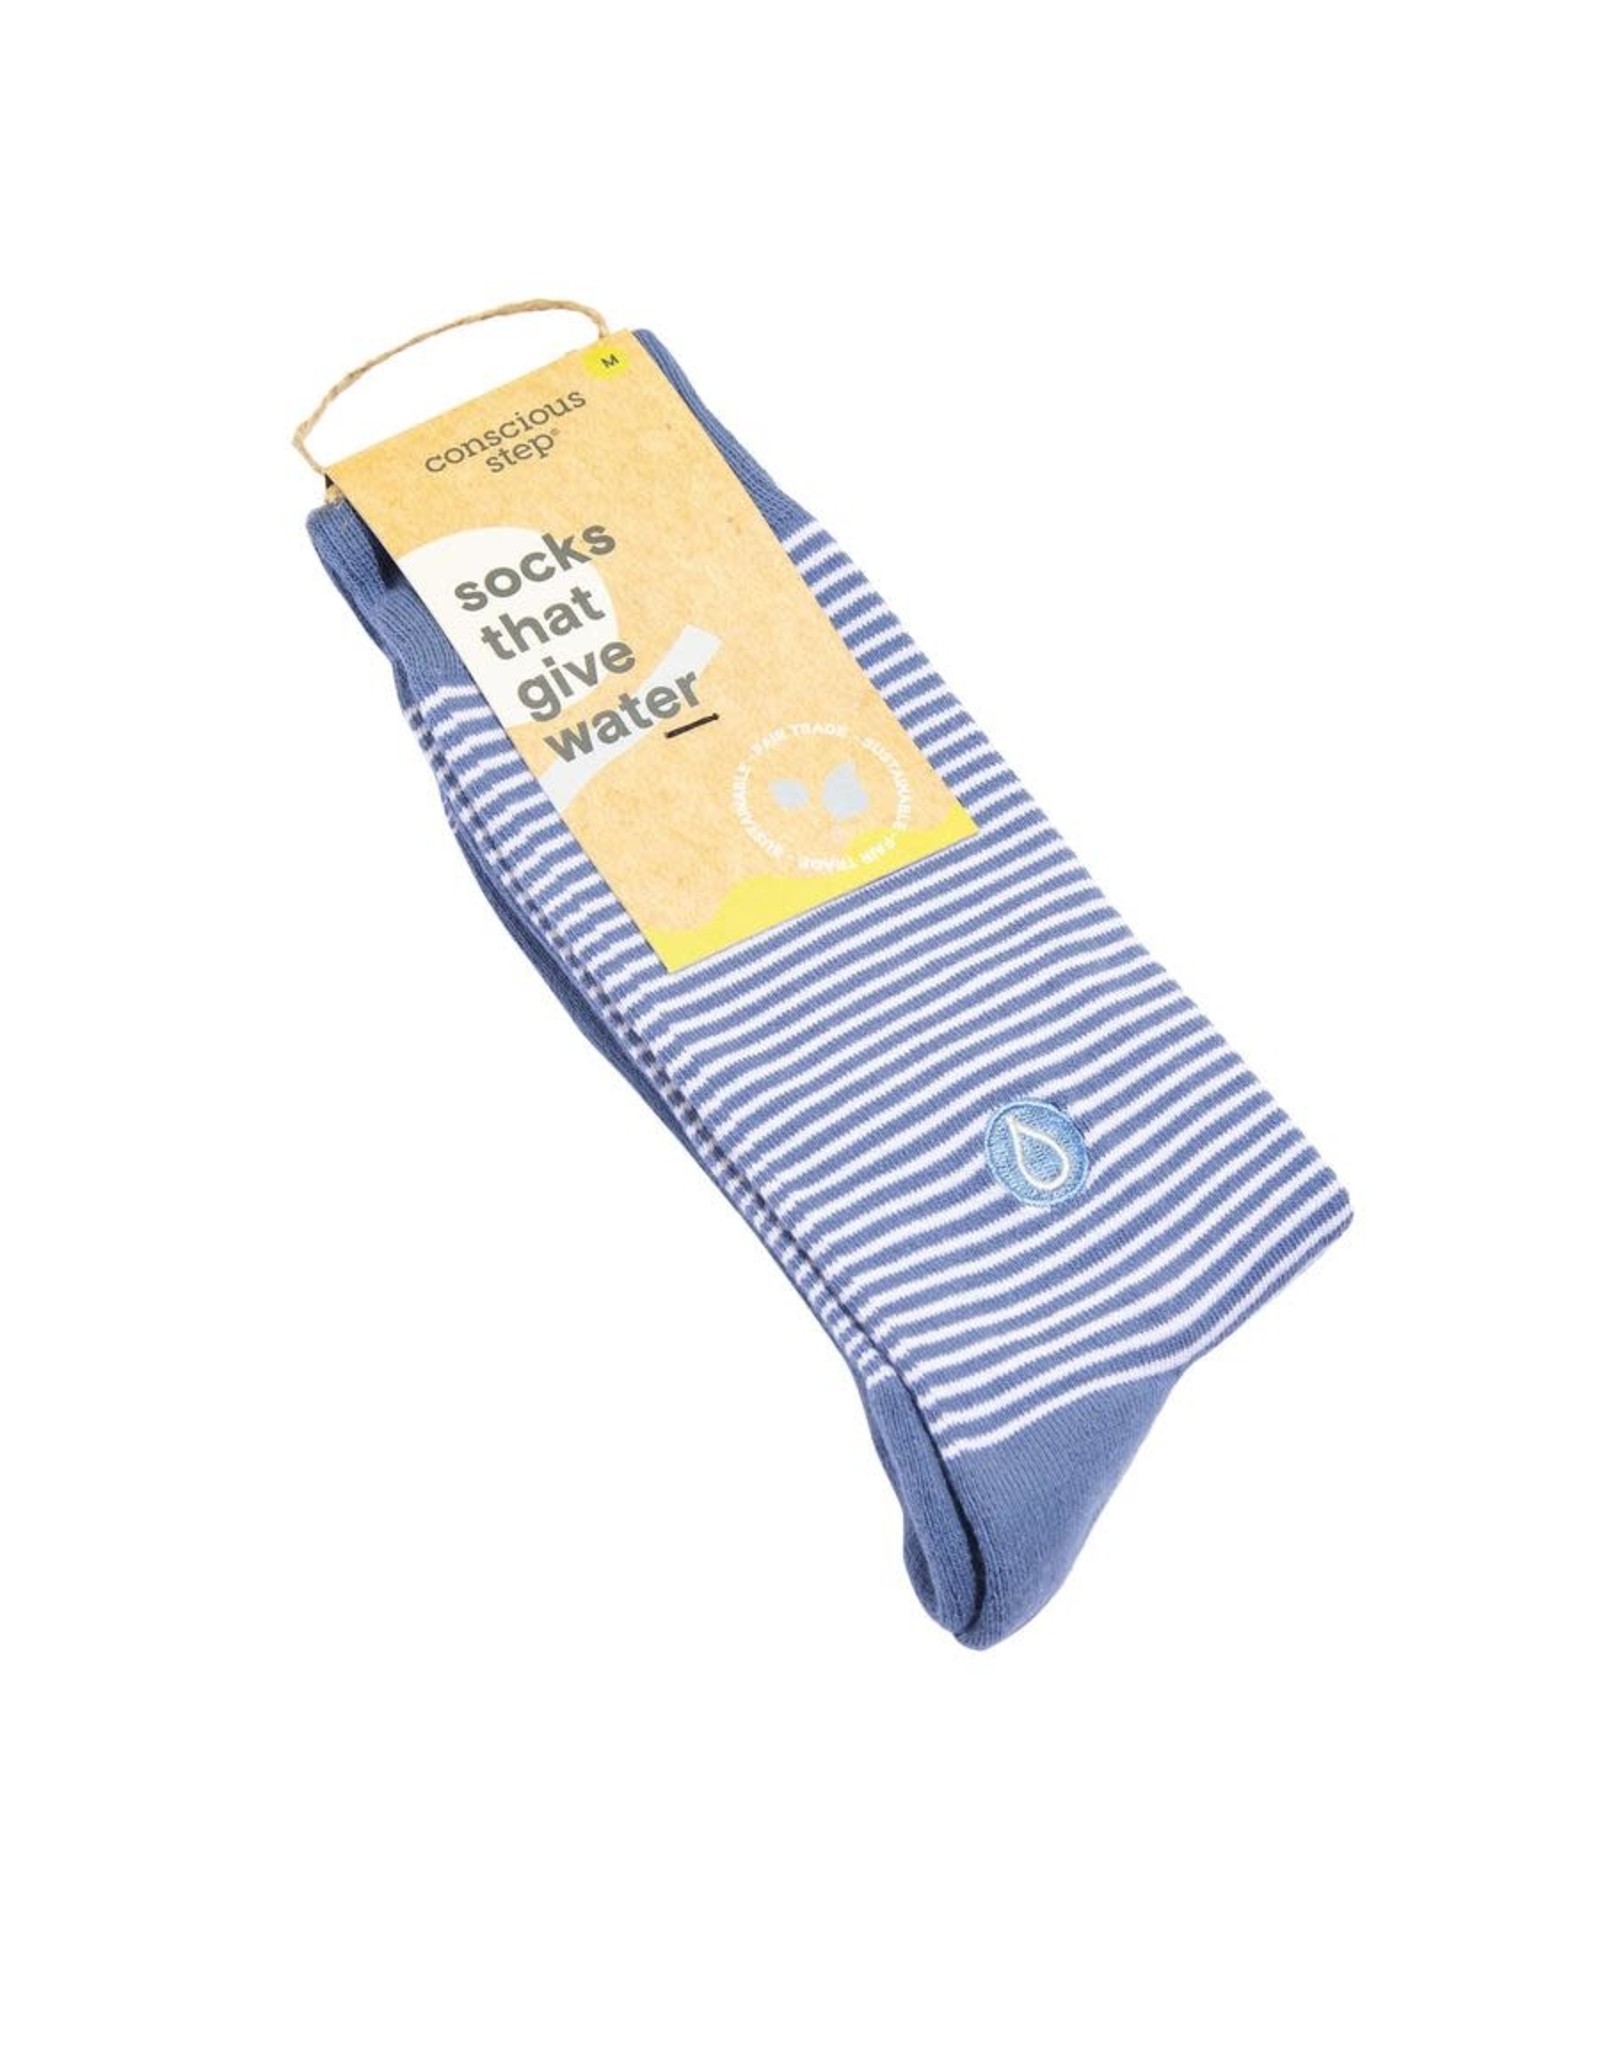 Trade roots Socks that Give Water, Blue Stripe